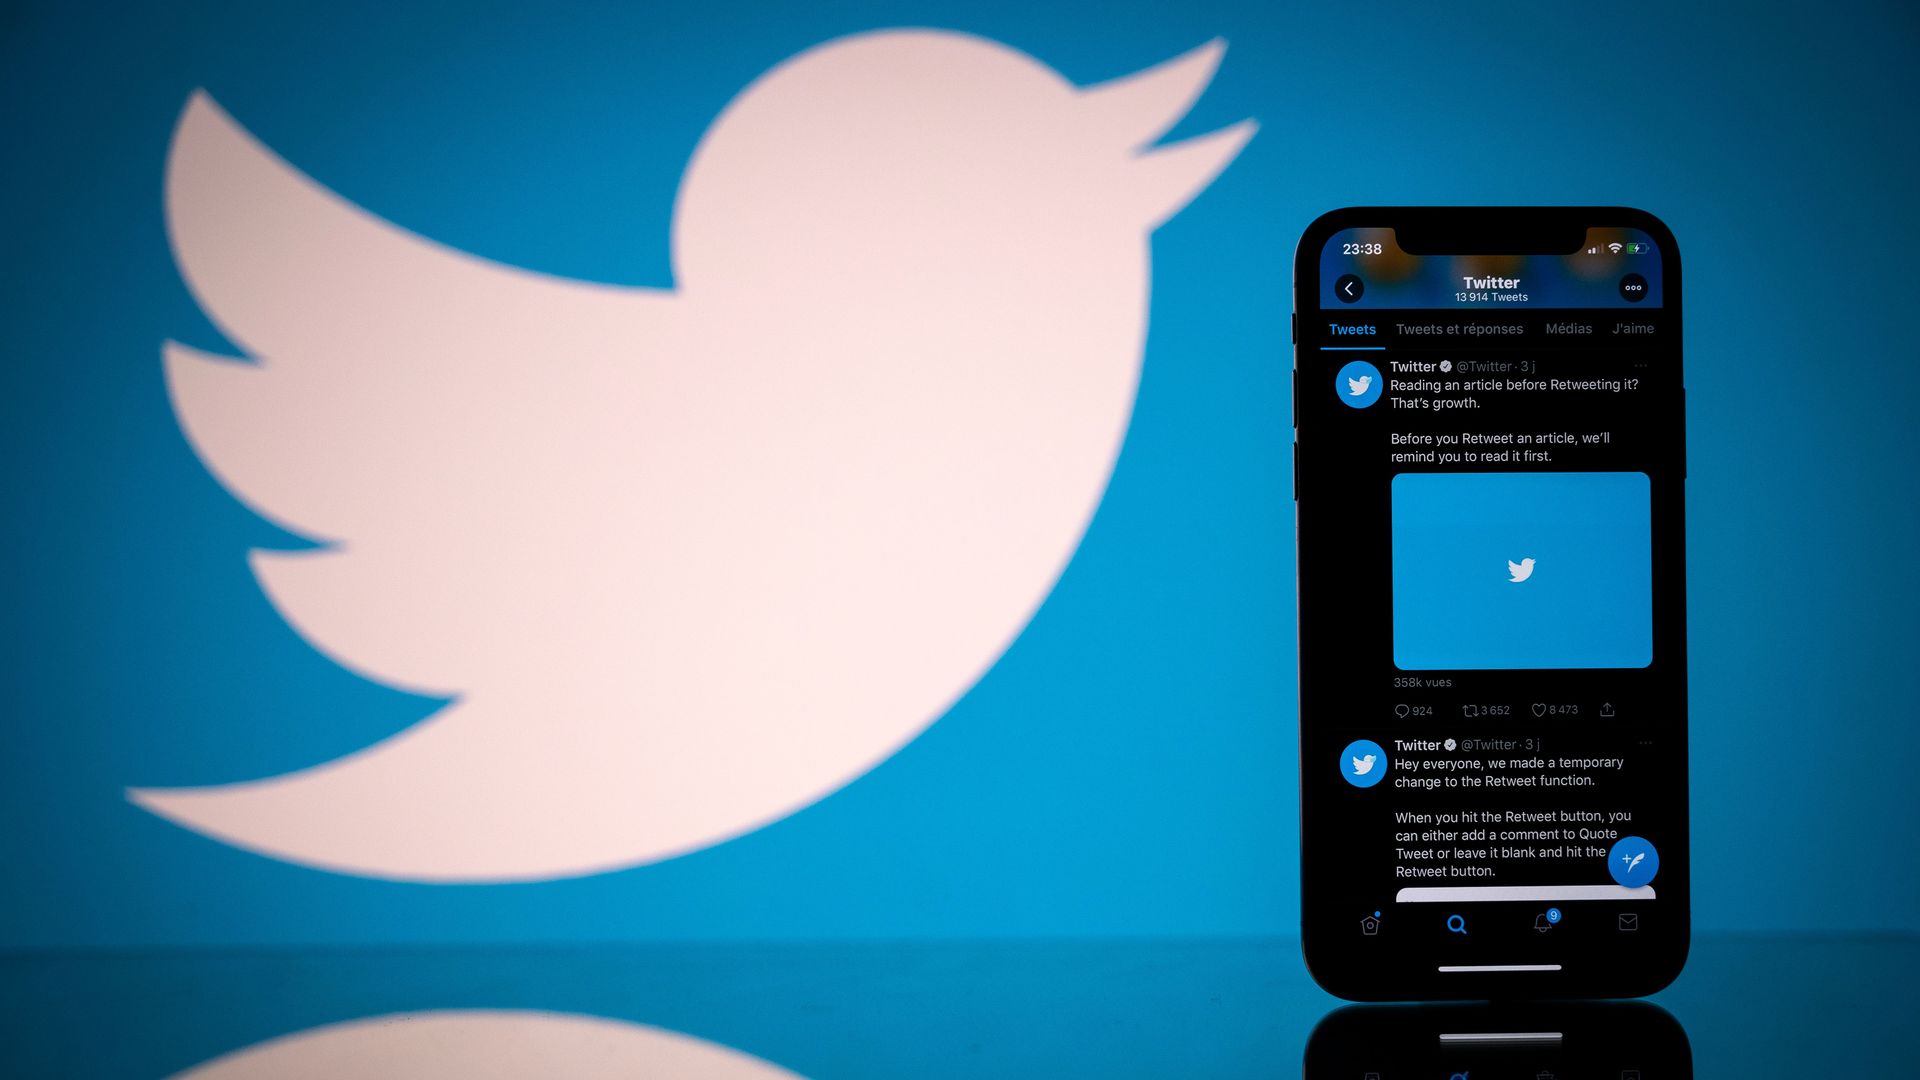 The Twitter logo and a phone in the foreground.